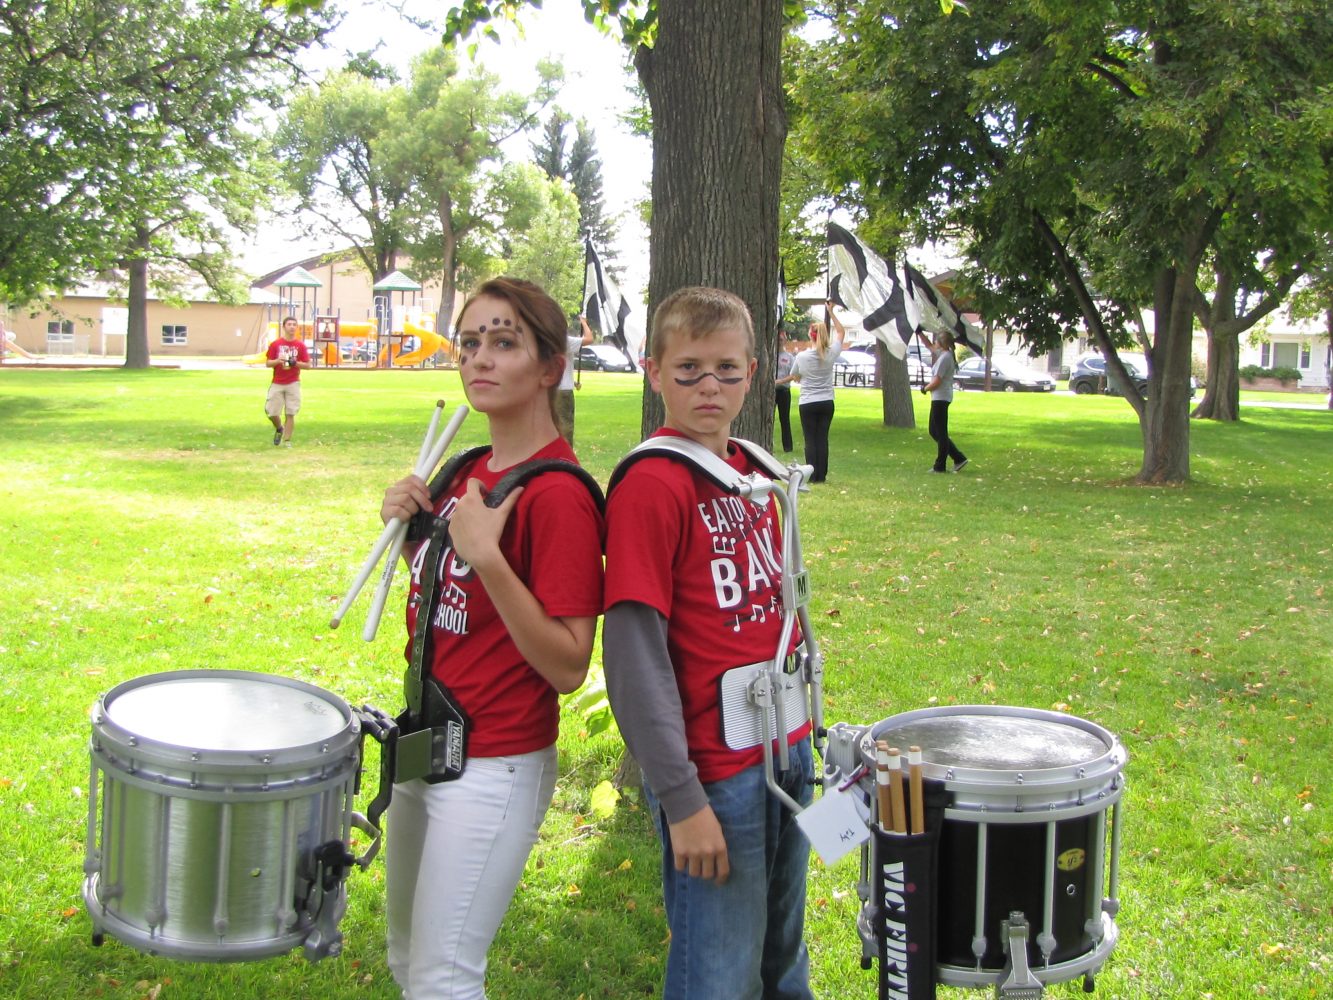 Drum players, Shelby Dyer (19) and Toby Gavette (19), pose for an image before their performance in the parade.